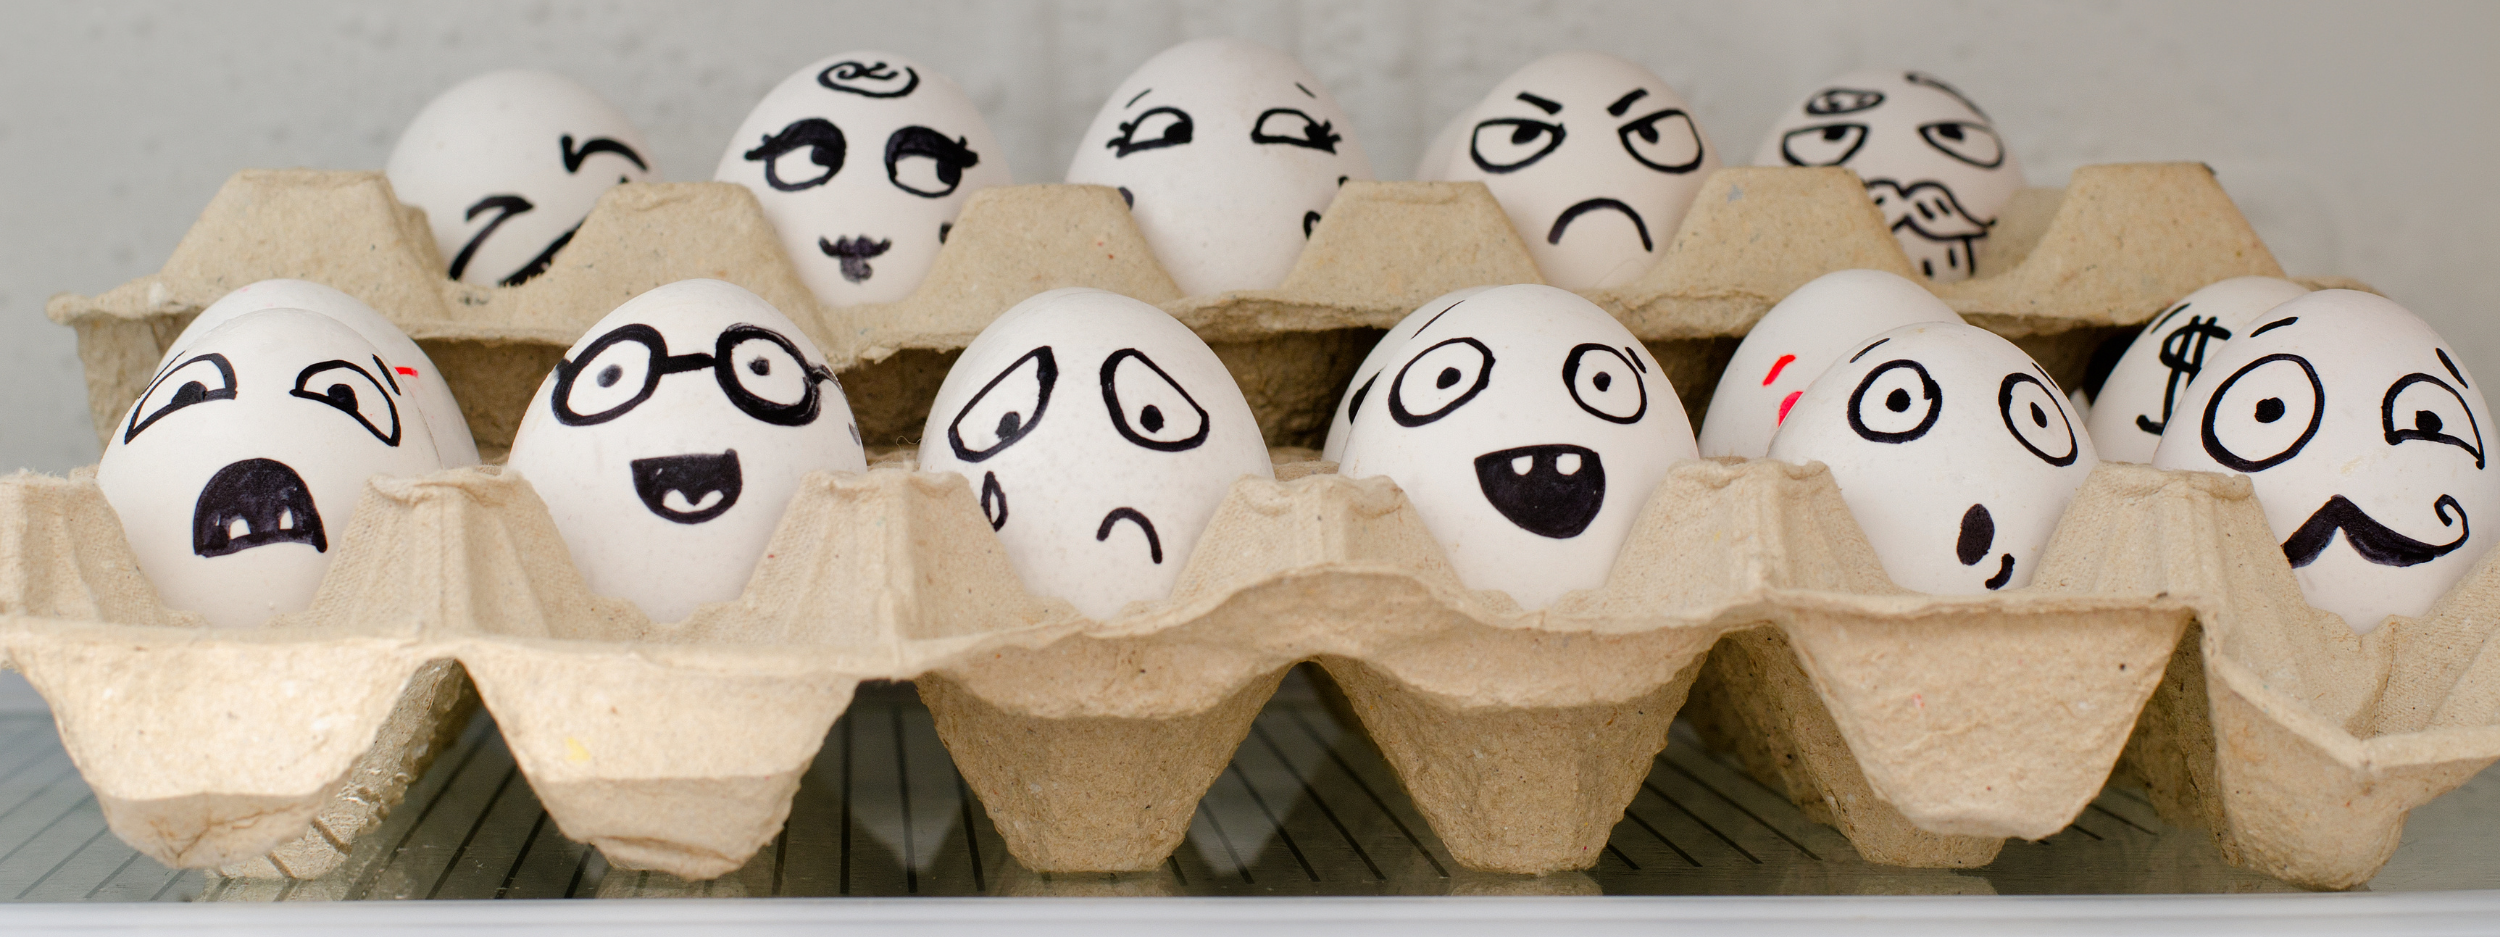 Eggs marked with emotional expressions